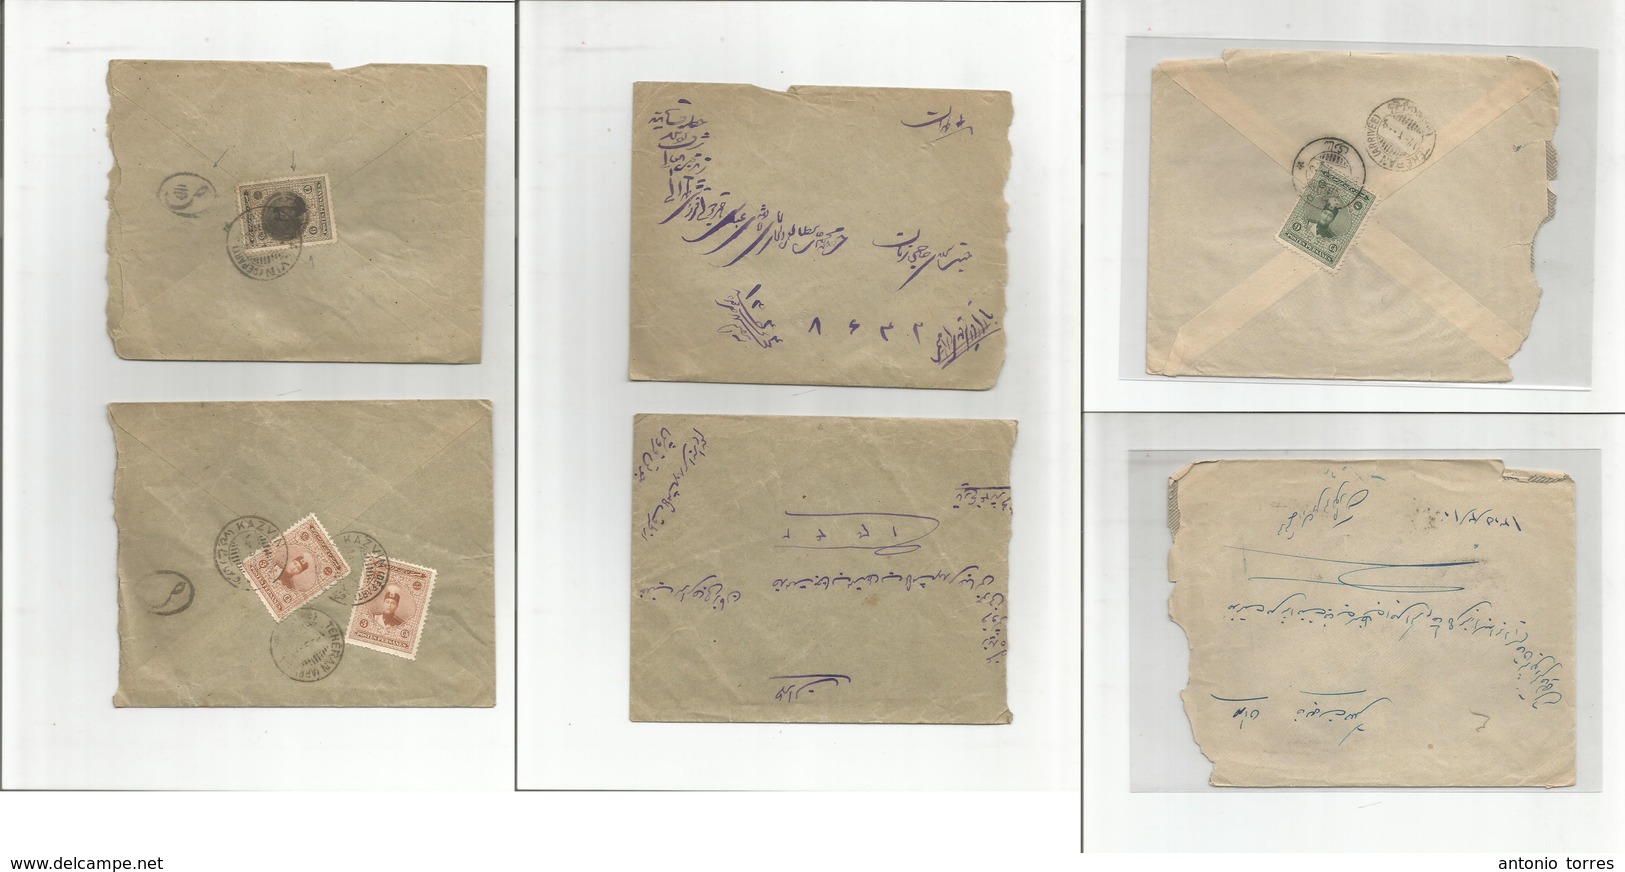 Persia. 1924. New Design Issue. 3 Local Franked Covers, Diff Values On With Control Canchets. Fine Trio + Cancels. - Irán